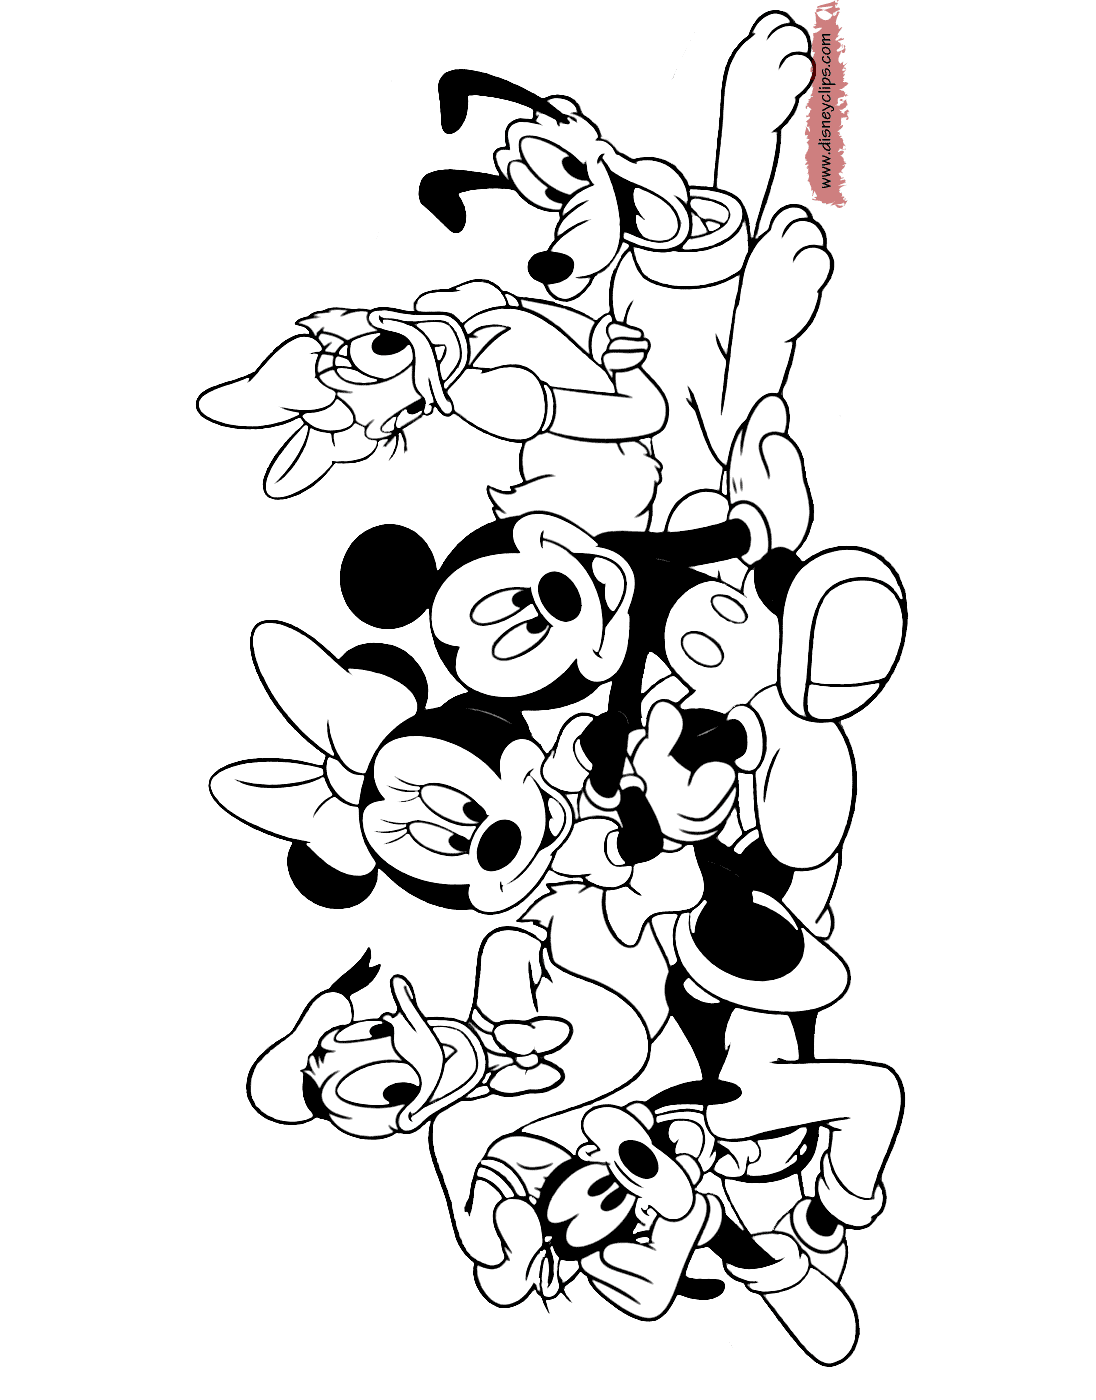 mickey and friends coloring pages mickey mouse friends coloring pages 6 disneyclipscom and mickey coloring friends pages 